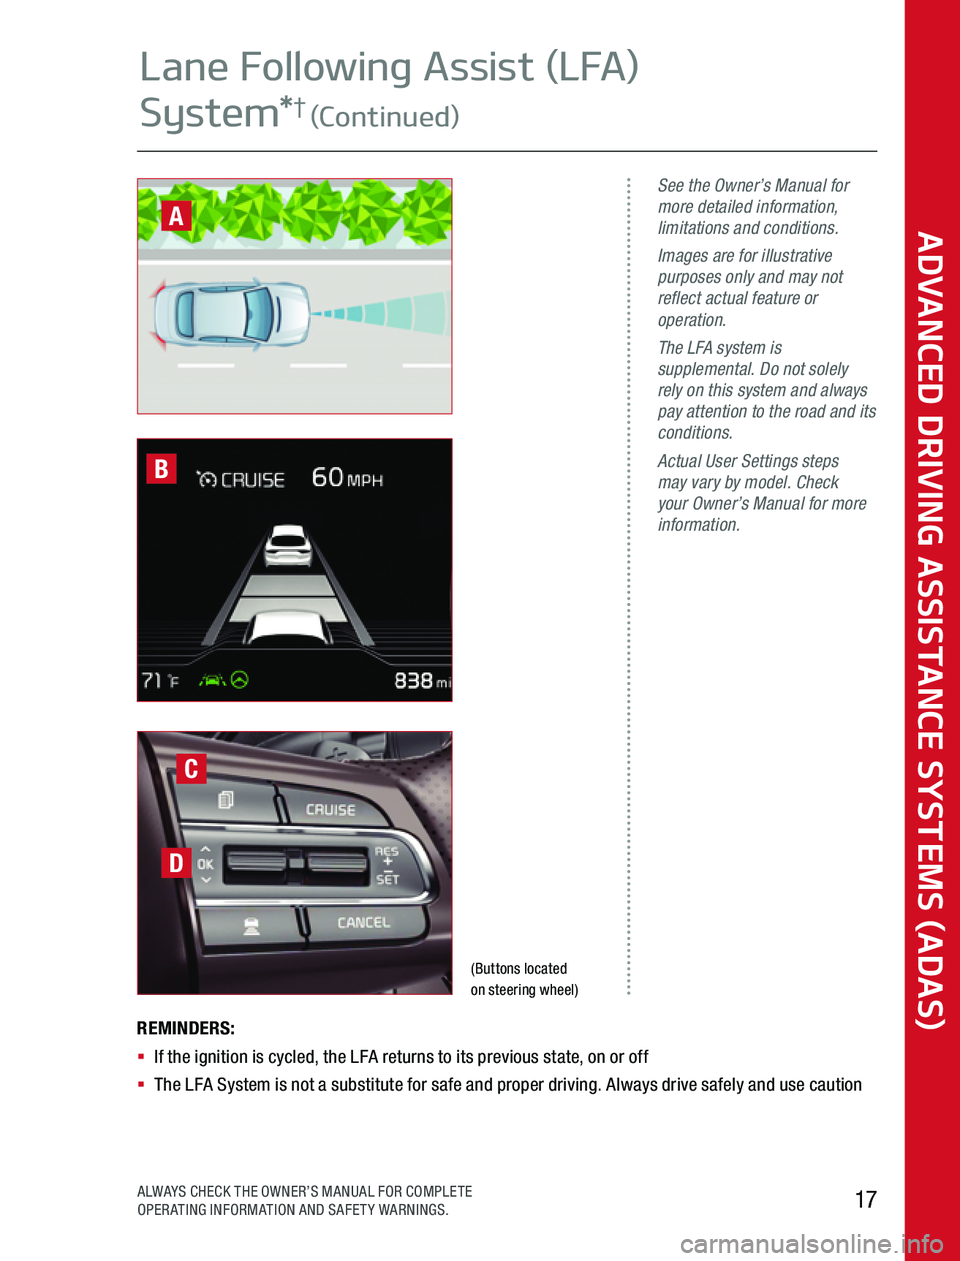 KIA OPTIMA 2020  Advanced Driving Assistance System (Buttons located  on steering wheel)
See the Owner’s Manual for more detailed information, limitations and conditions.Images are for illustrative purposes only and may not reflect actual feature or 